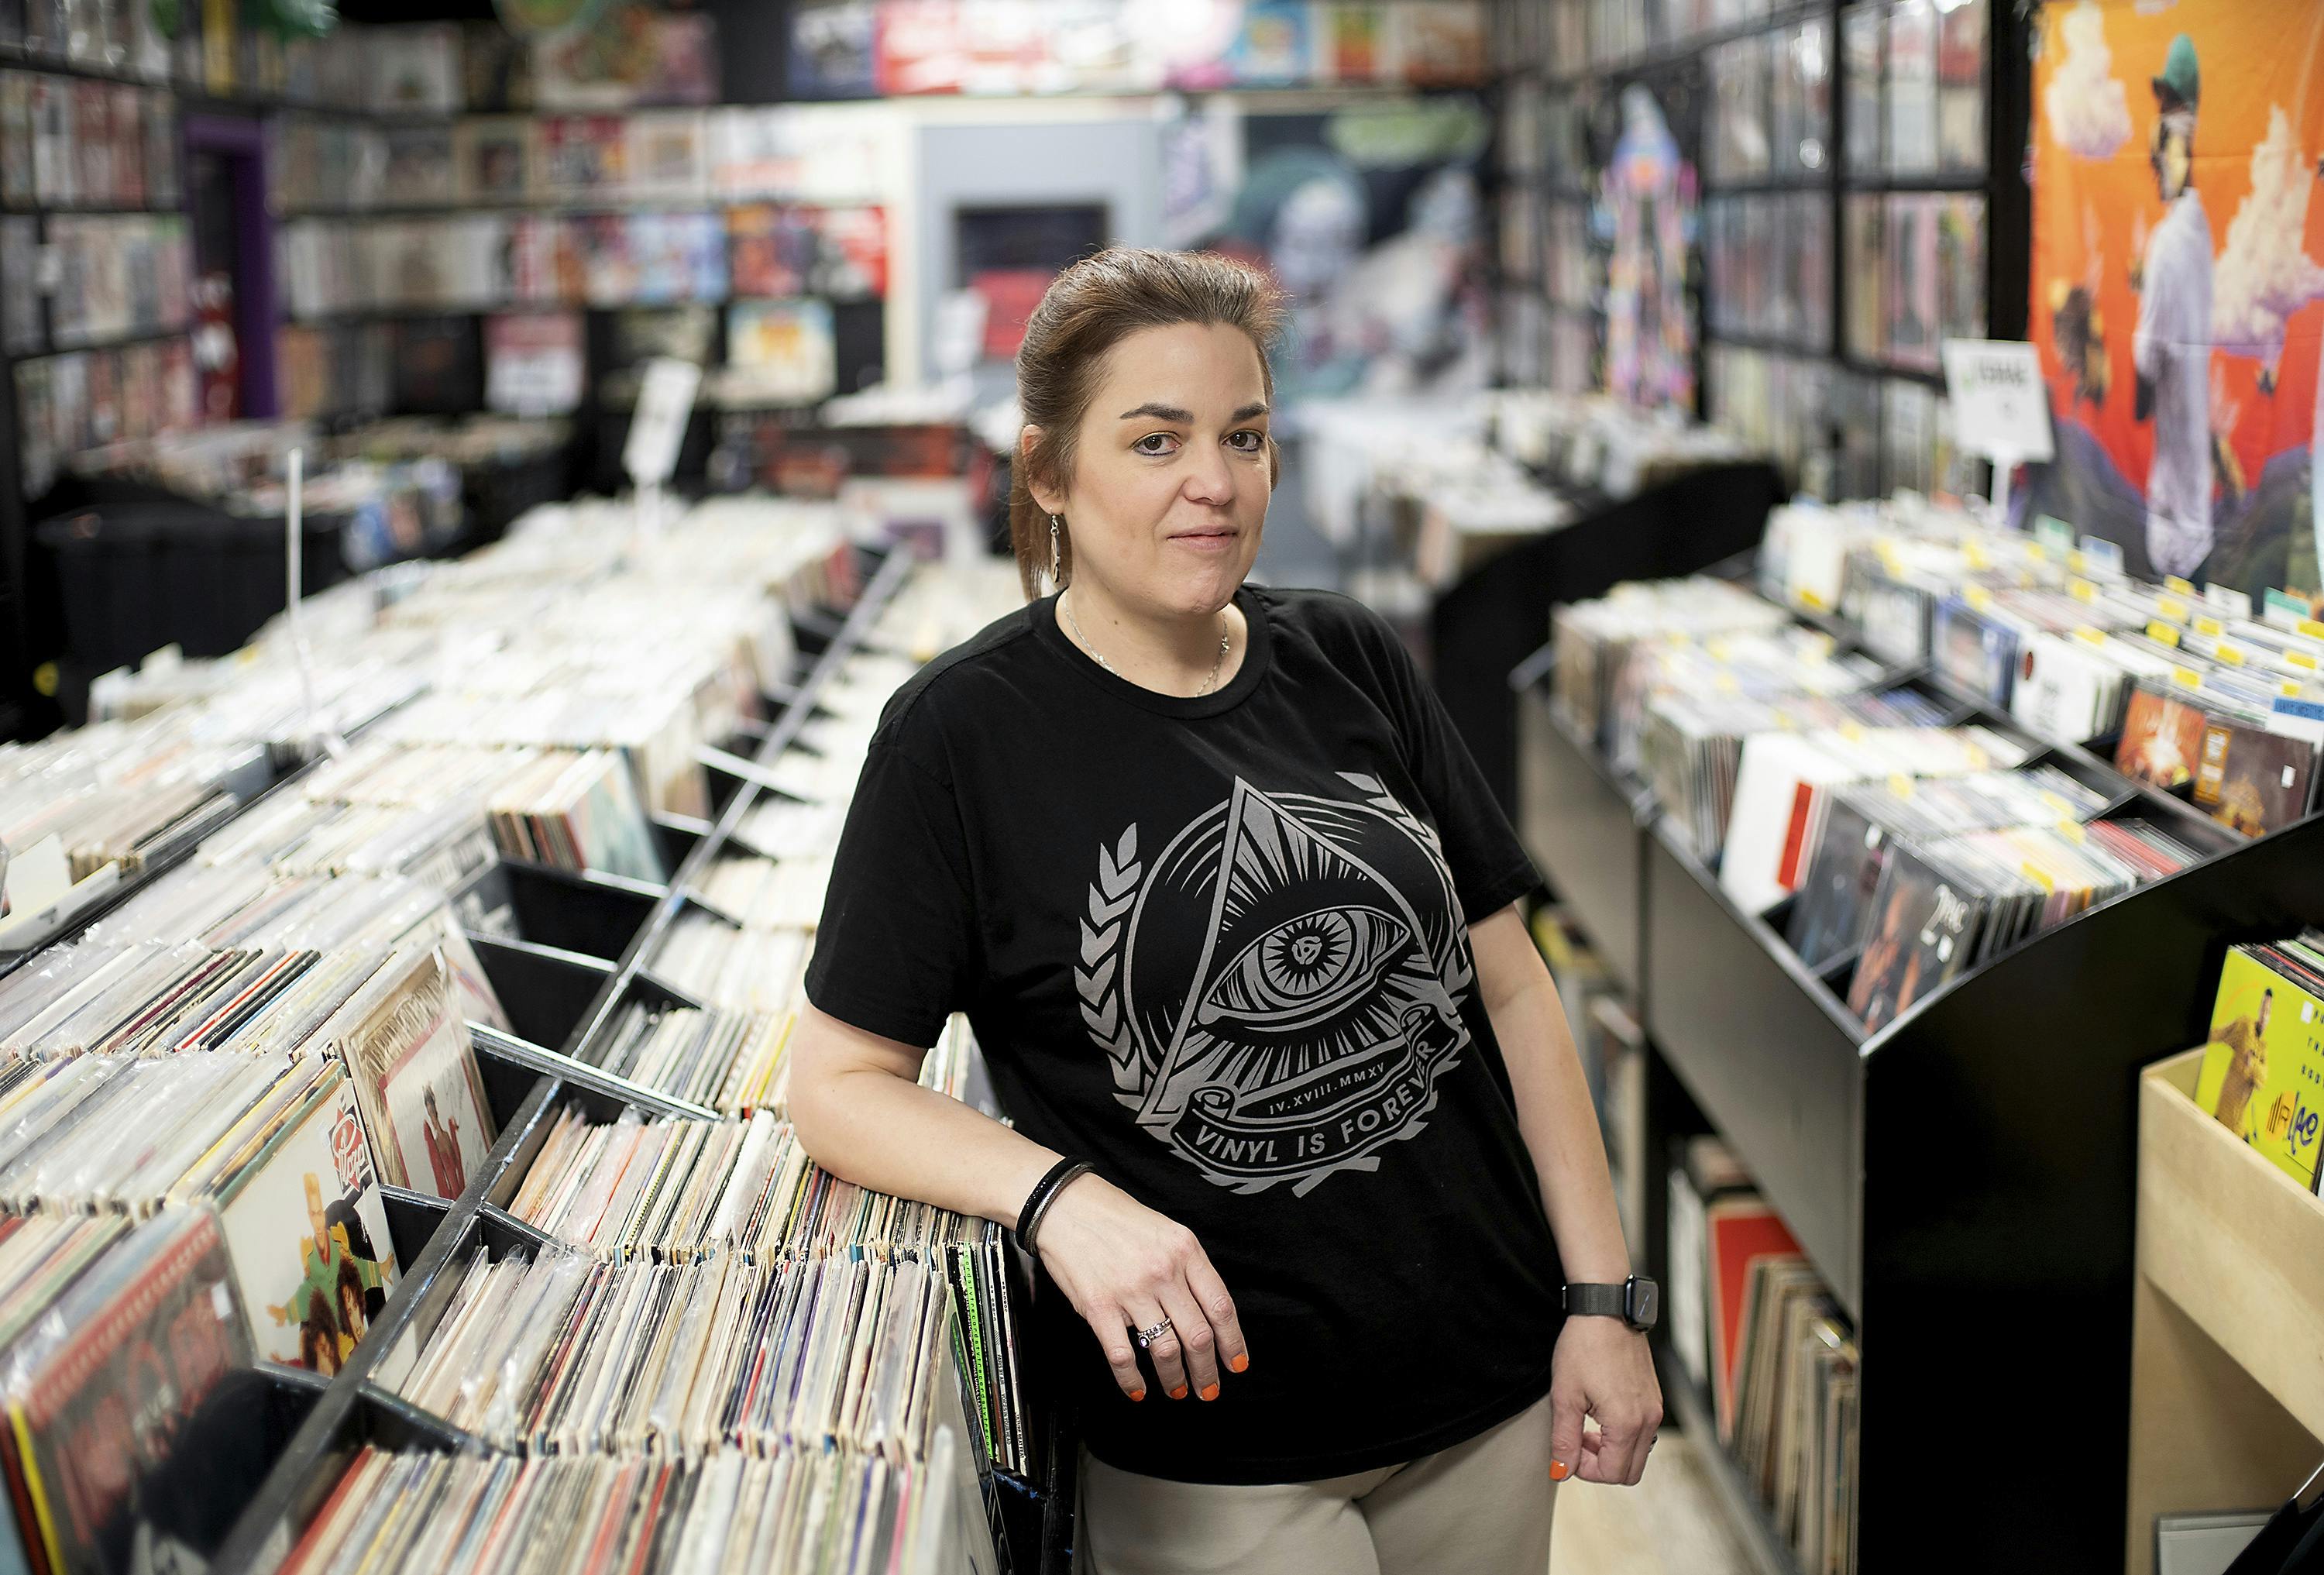 Nicole Mays, owner of Vinyl Heaven, in her store on Tuesday, April 11, 2023, in Dickinson, Texas. (Elizabeth Conley/Houston Chronicle via AP)